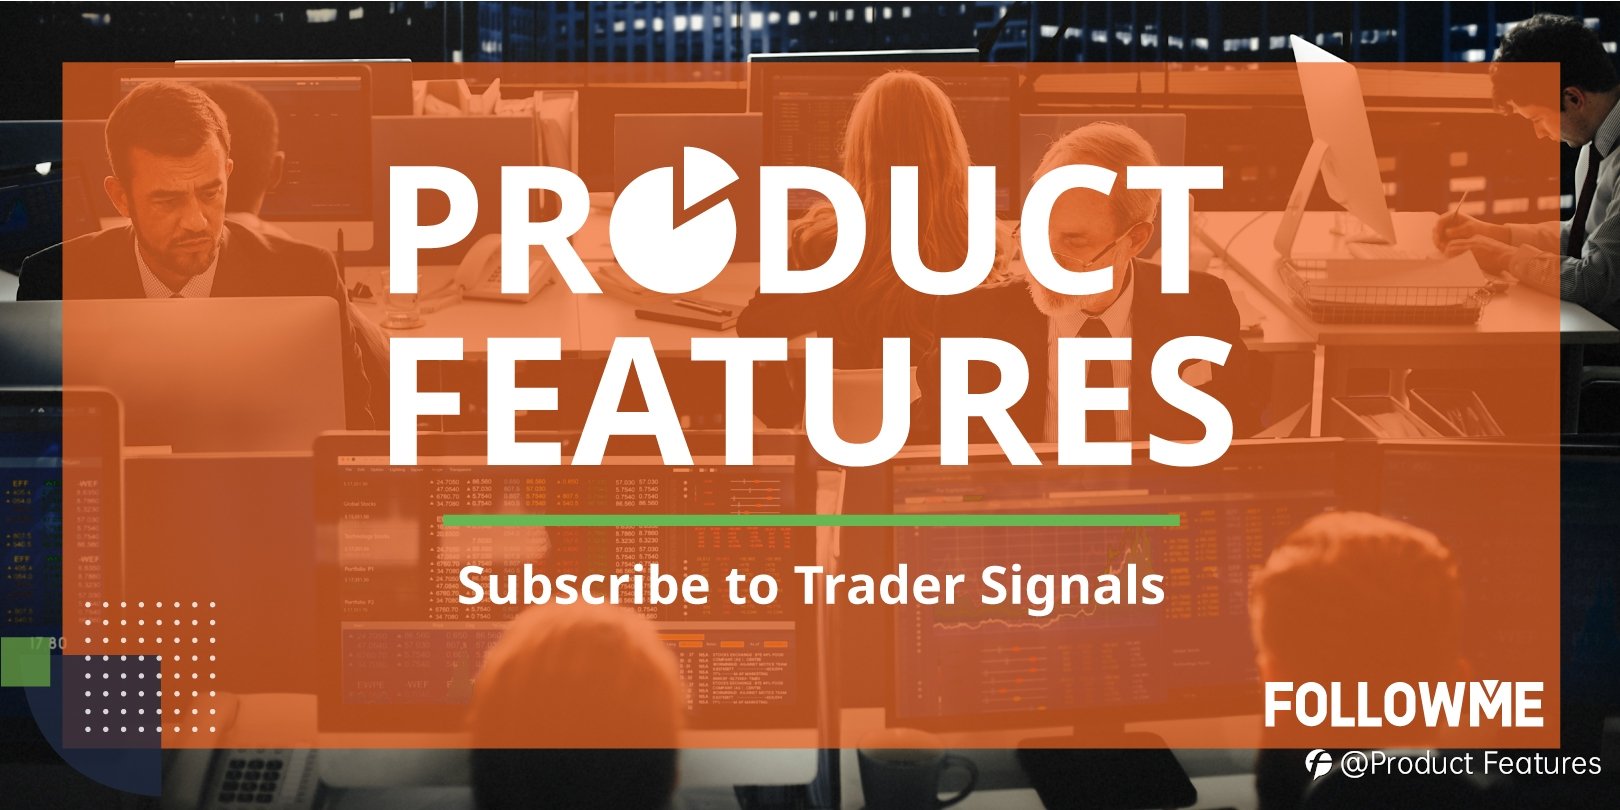 UPDATE: Subscribe to Trader Signals